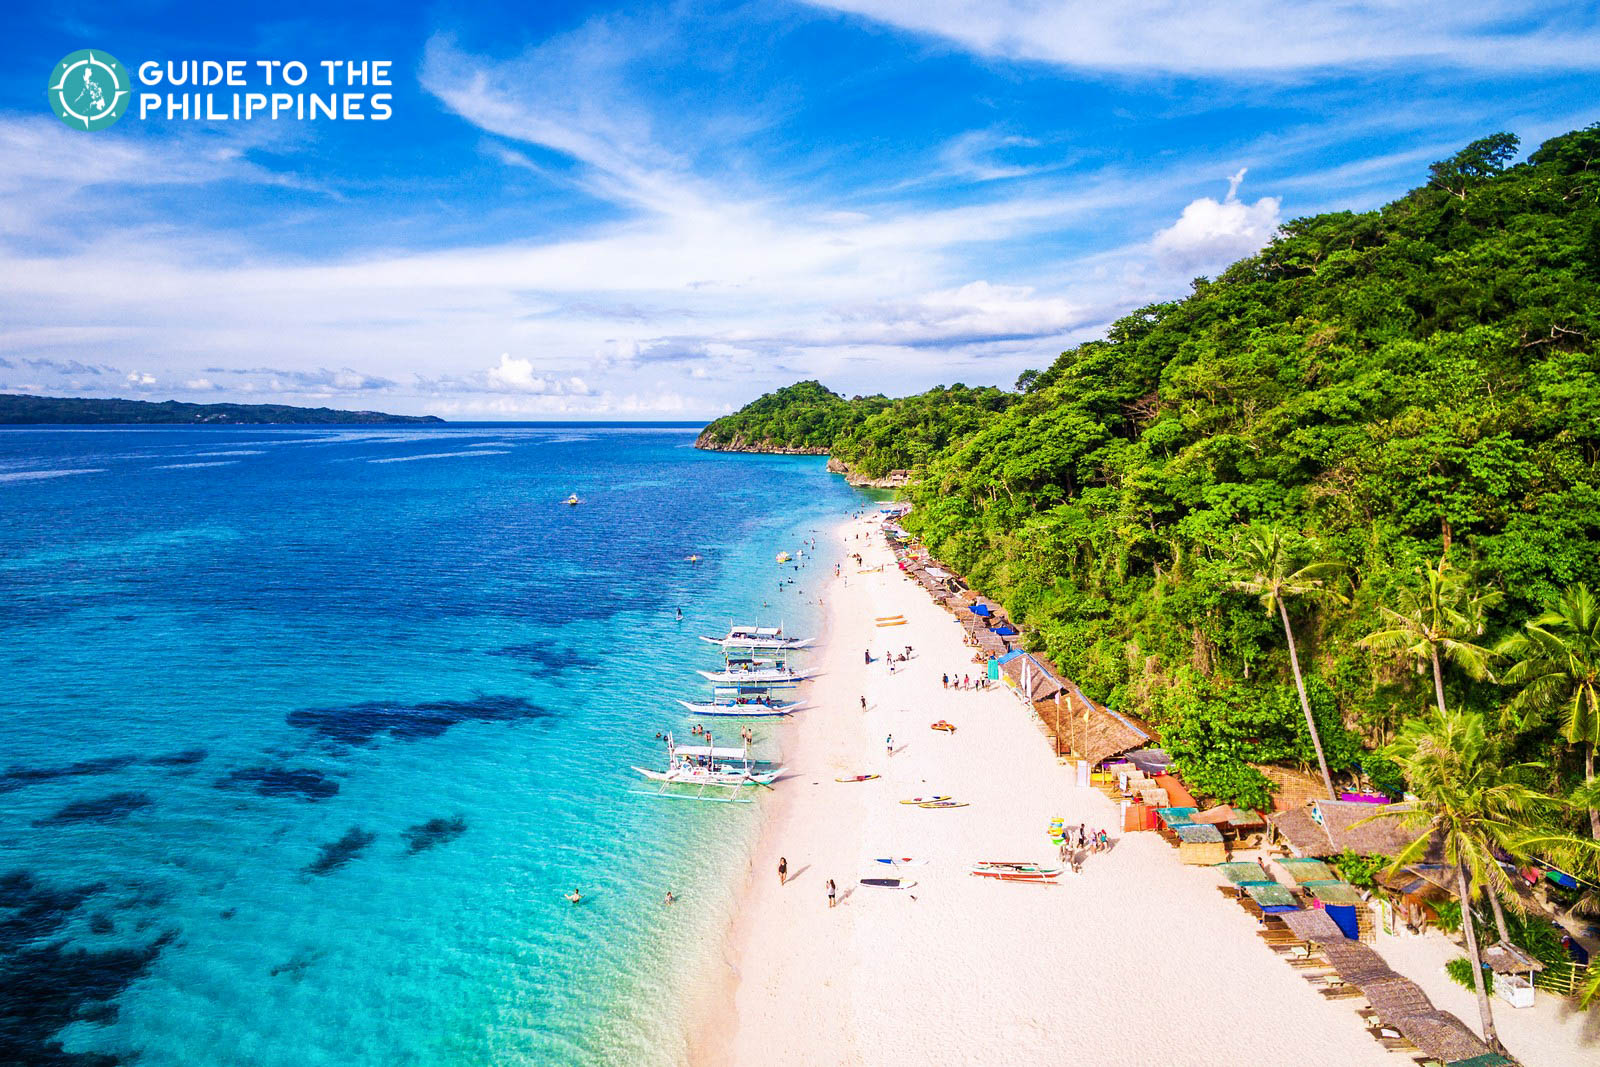 10 Most Beautiful Beach Resorts in the Philippines